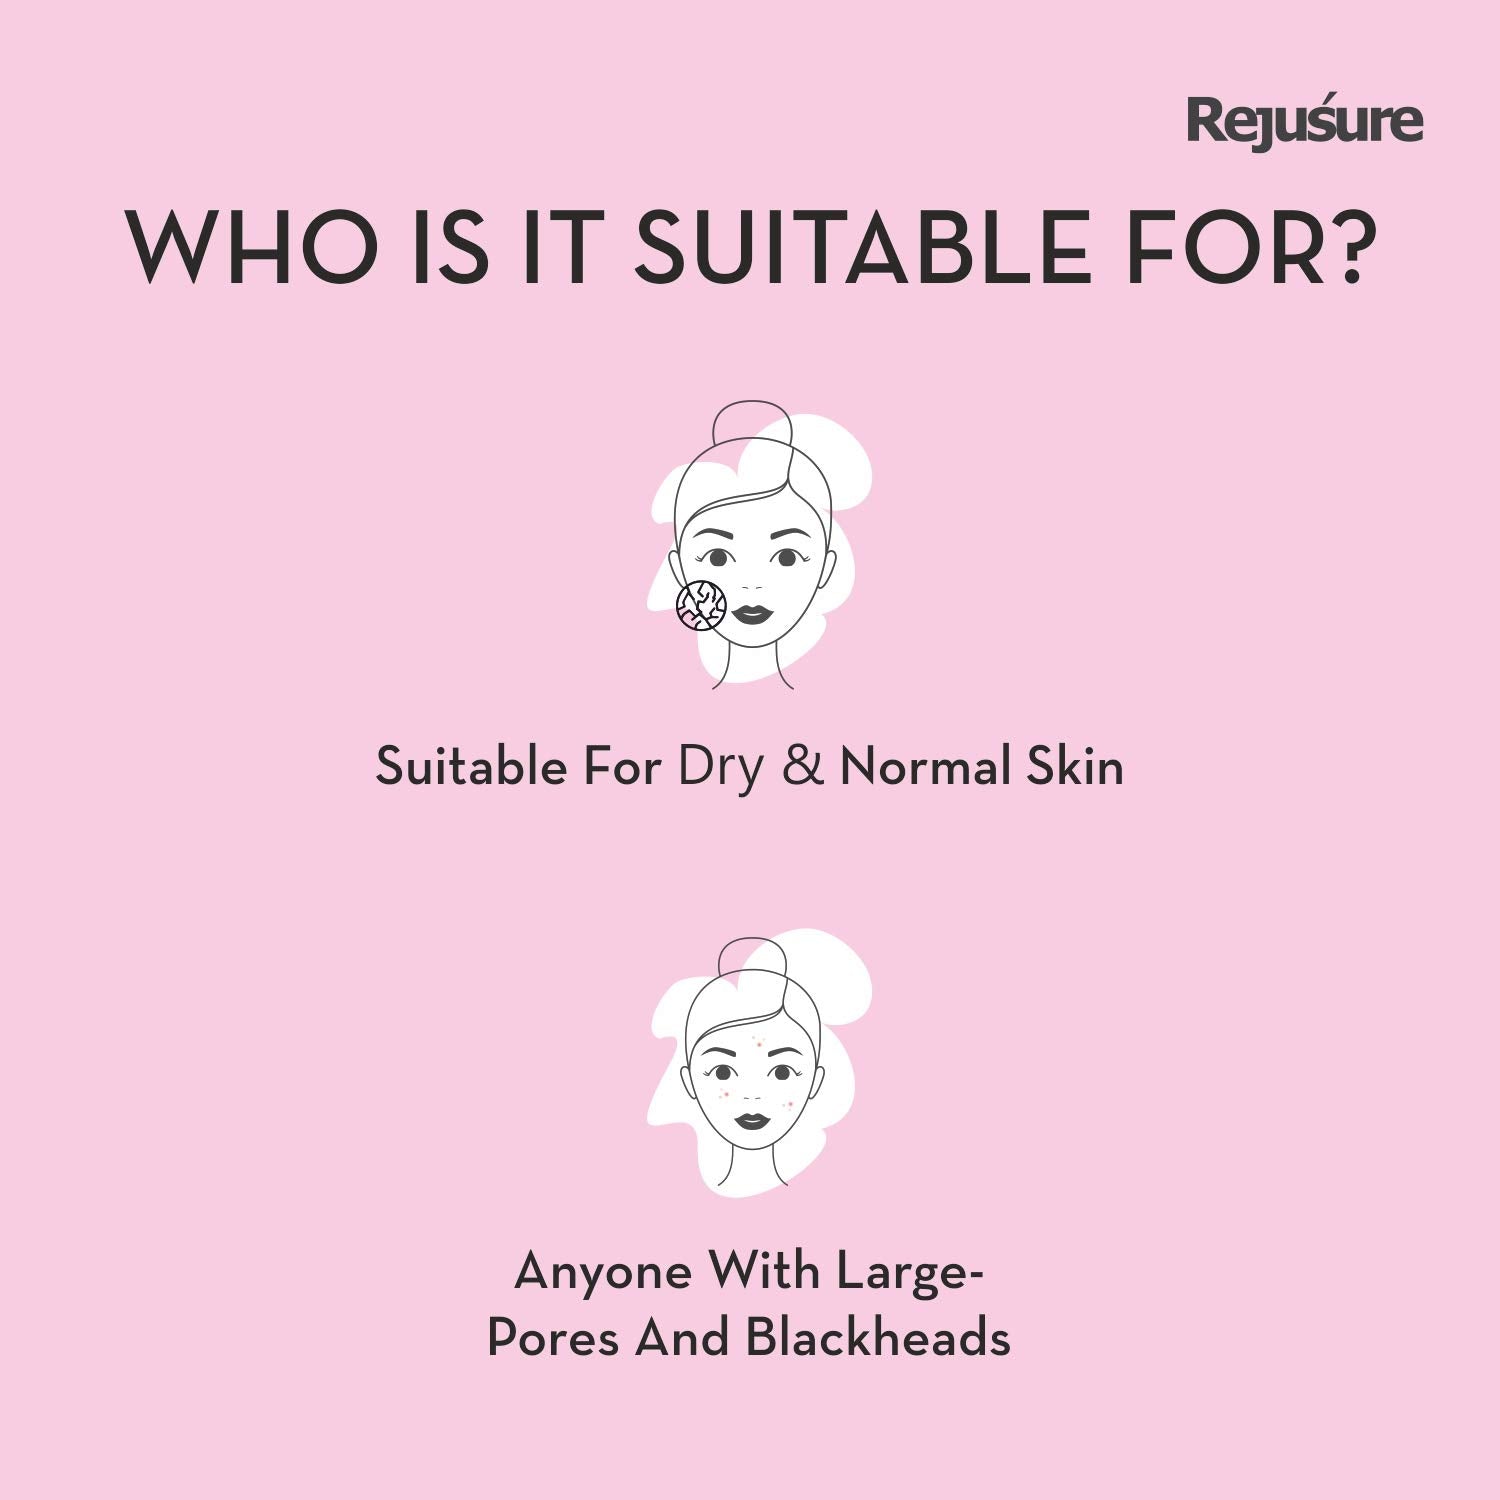 Rejusure AHA 25% + PHA 5% + BHA 2% Facial Peeling Solution for Glowing Skin, Smooth Texture & Pore Cleansing | Weekend Facial Exfoliant or Peel 30ml (Pack of 2)